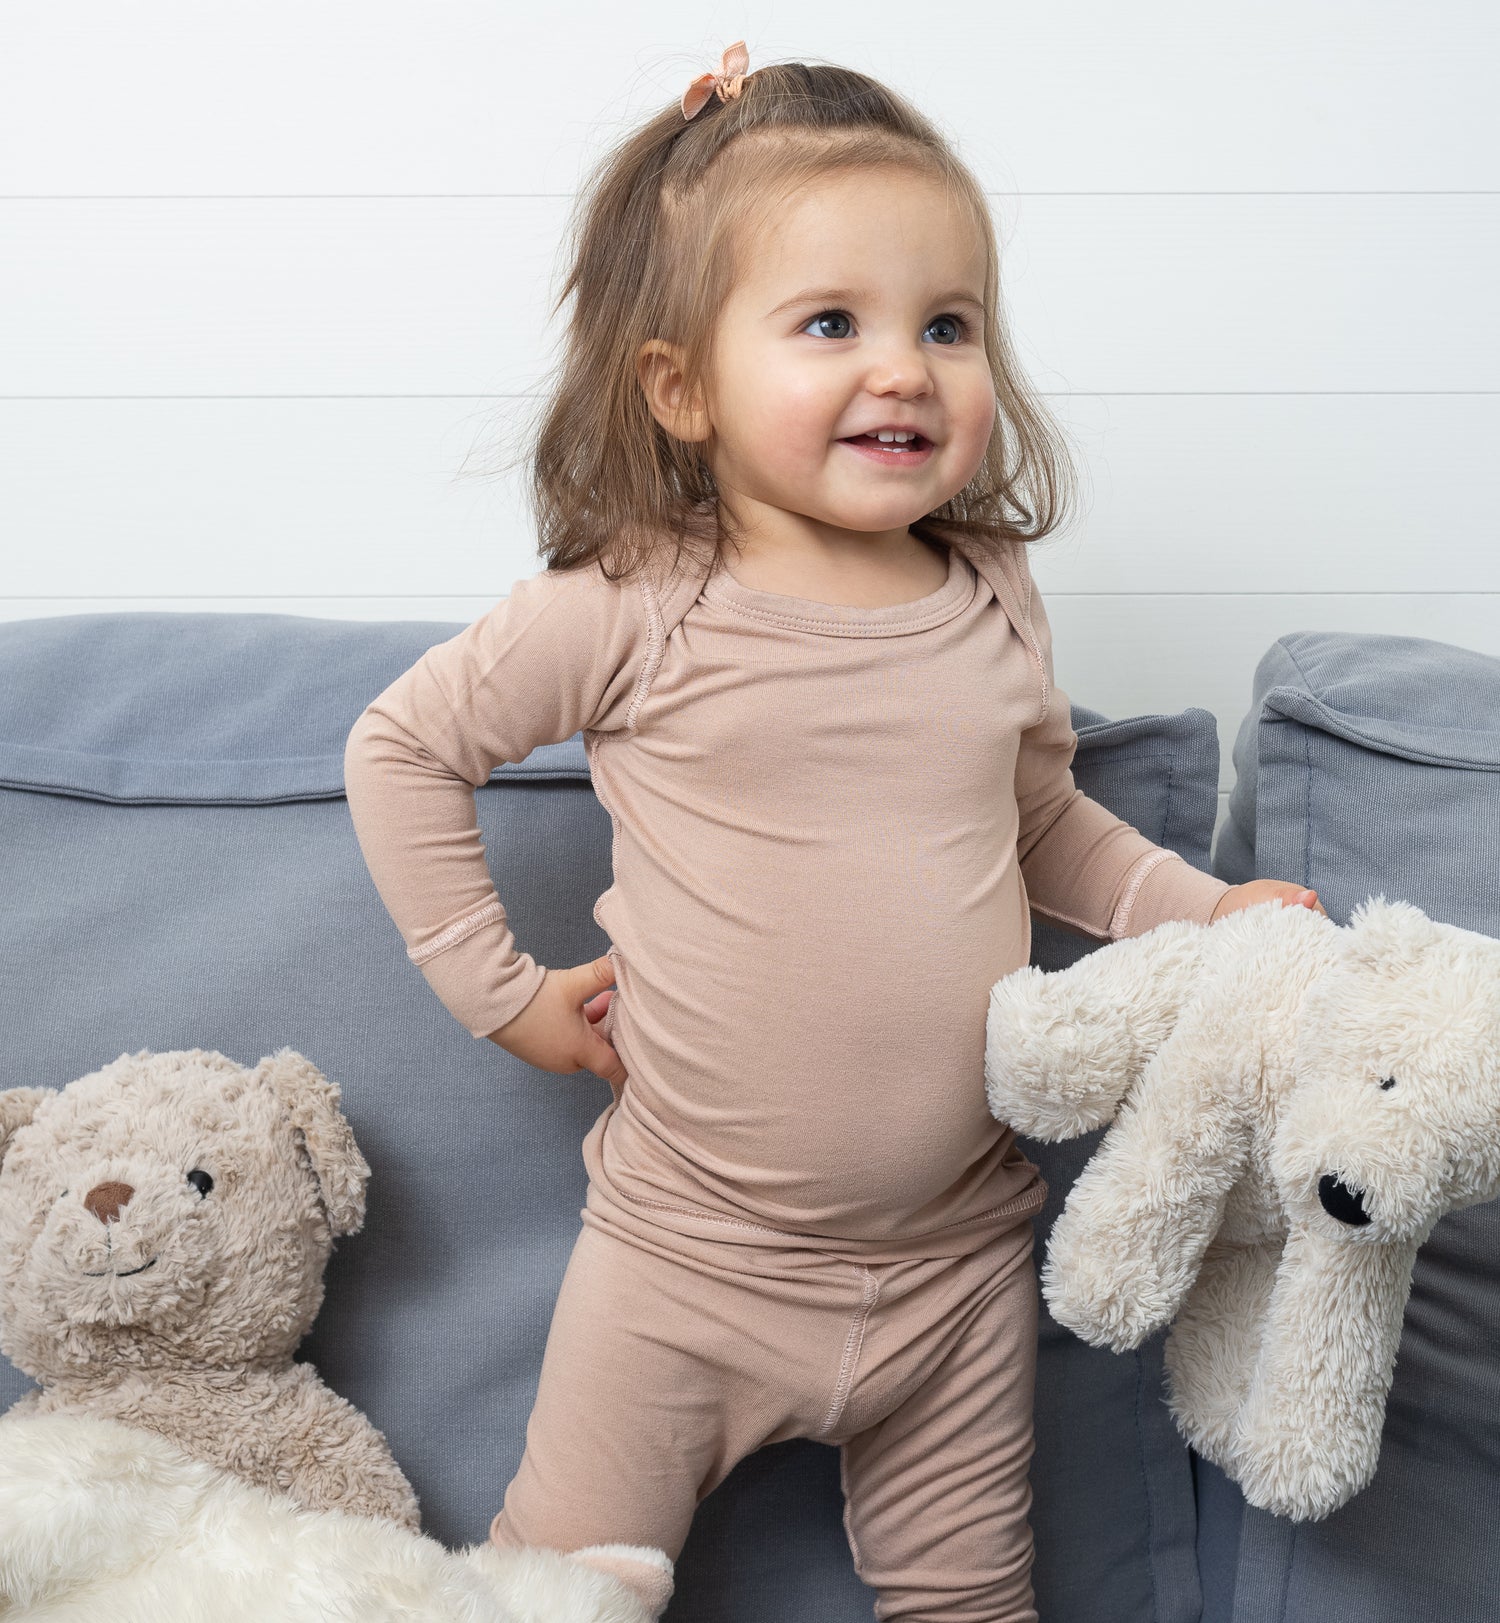 Girl Wearing SOOTHLA Allergy-friendly Clothing